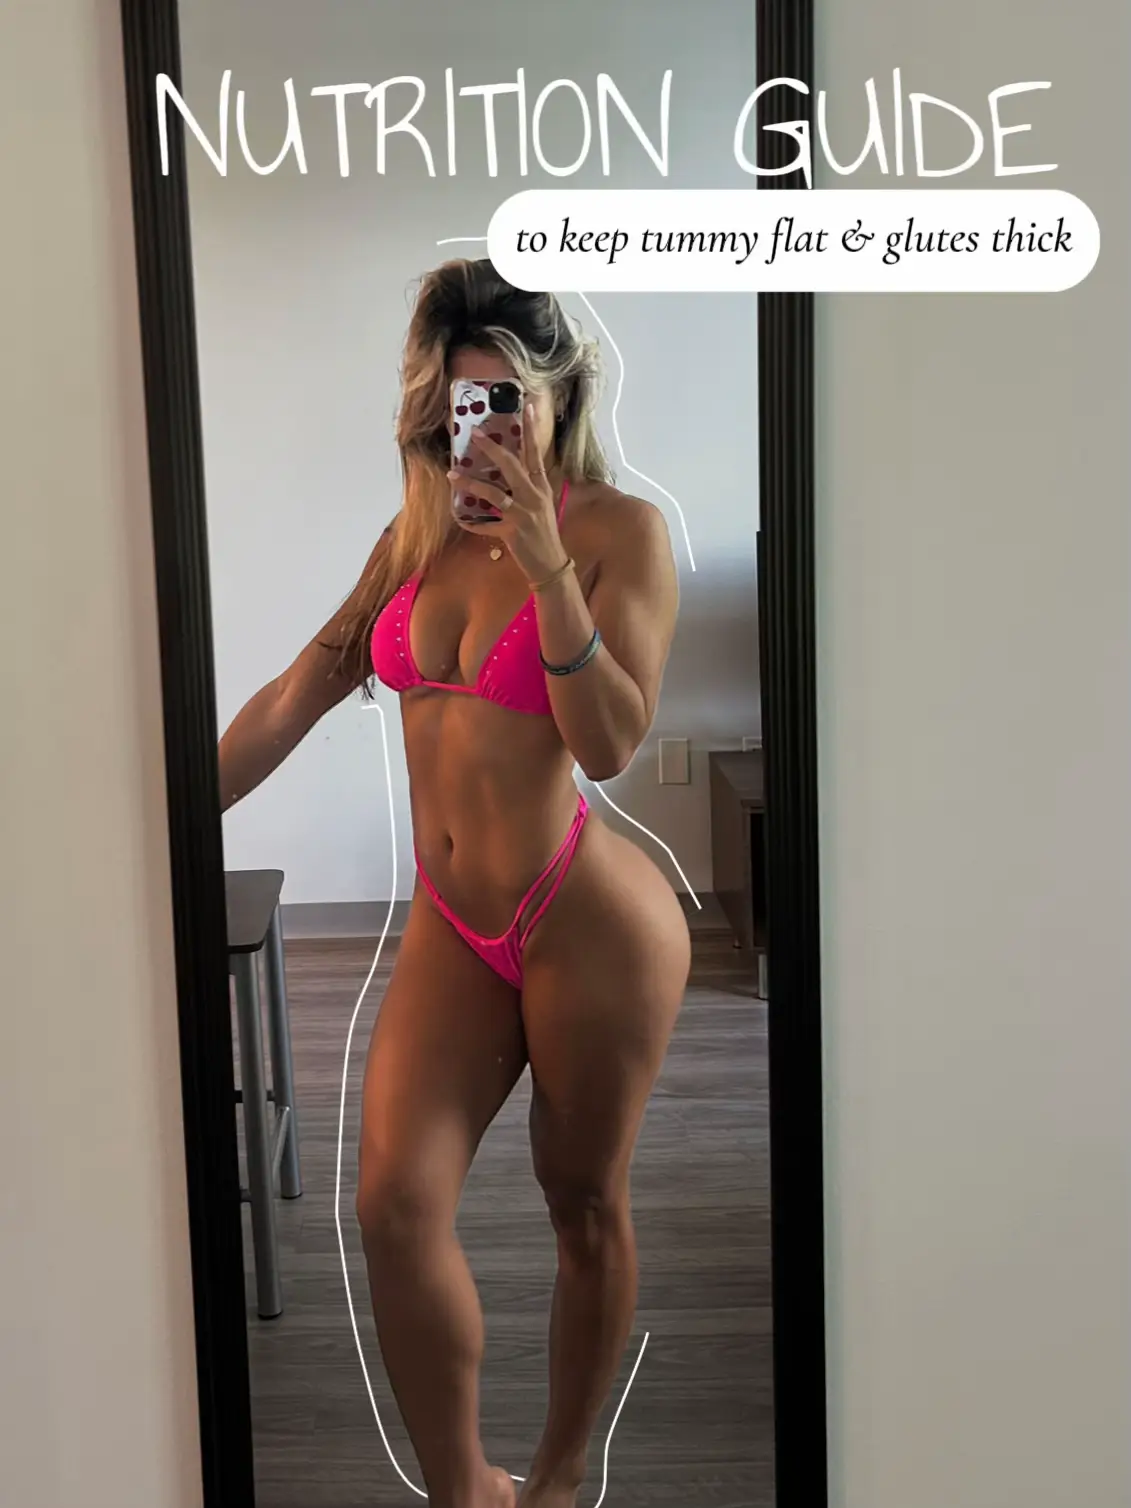 30 Day Challenges For A Bigger Butt 🍑, Bigger Boobs 😋, Flat